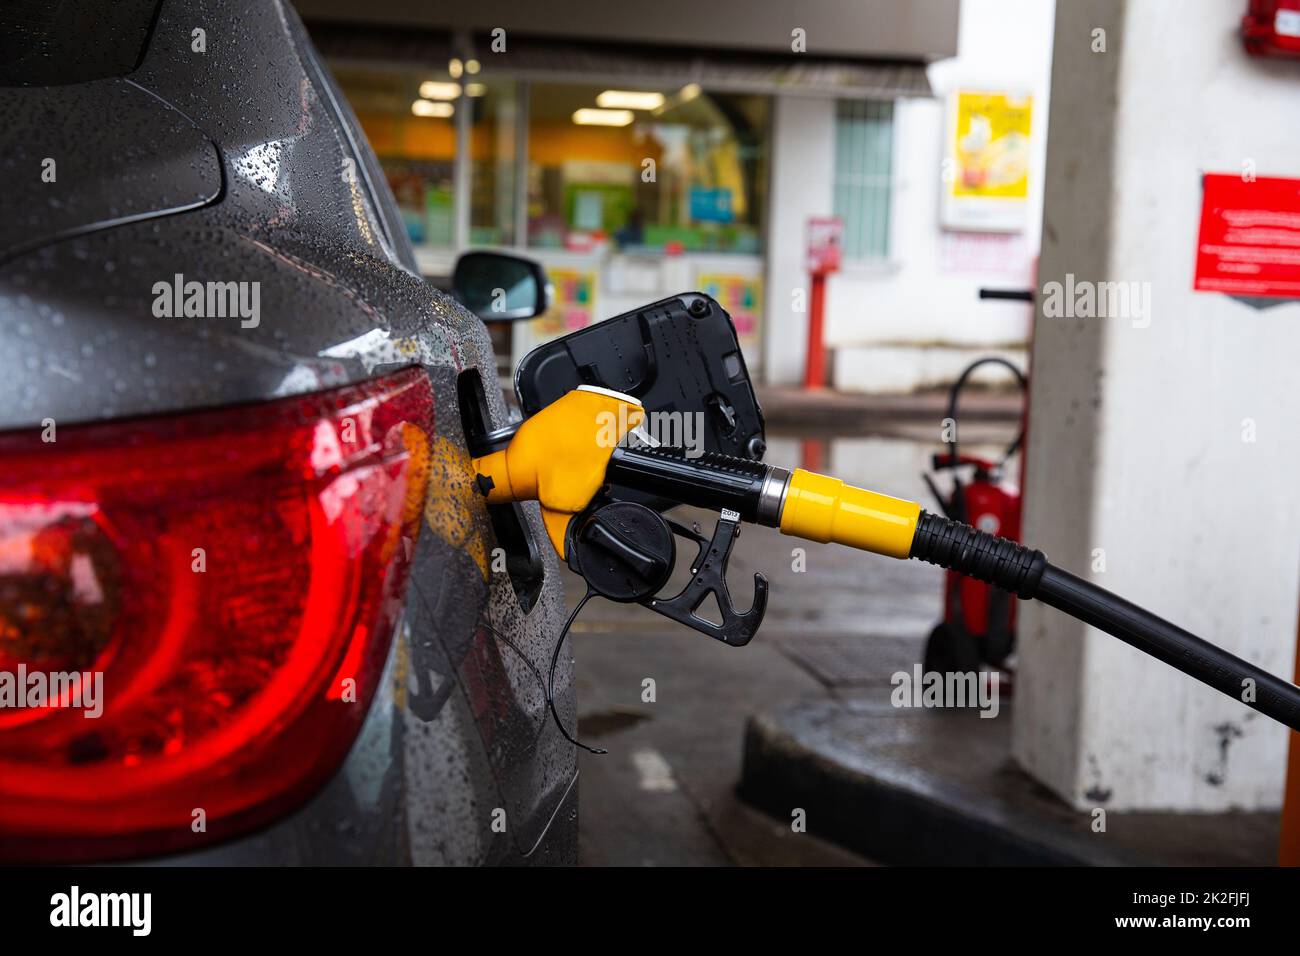 Pumping gasoline fuel in car at gas station. Refueling automobile with gasoline or diesel with a fuel dispenser. Stock Photo